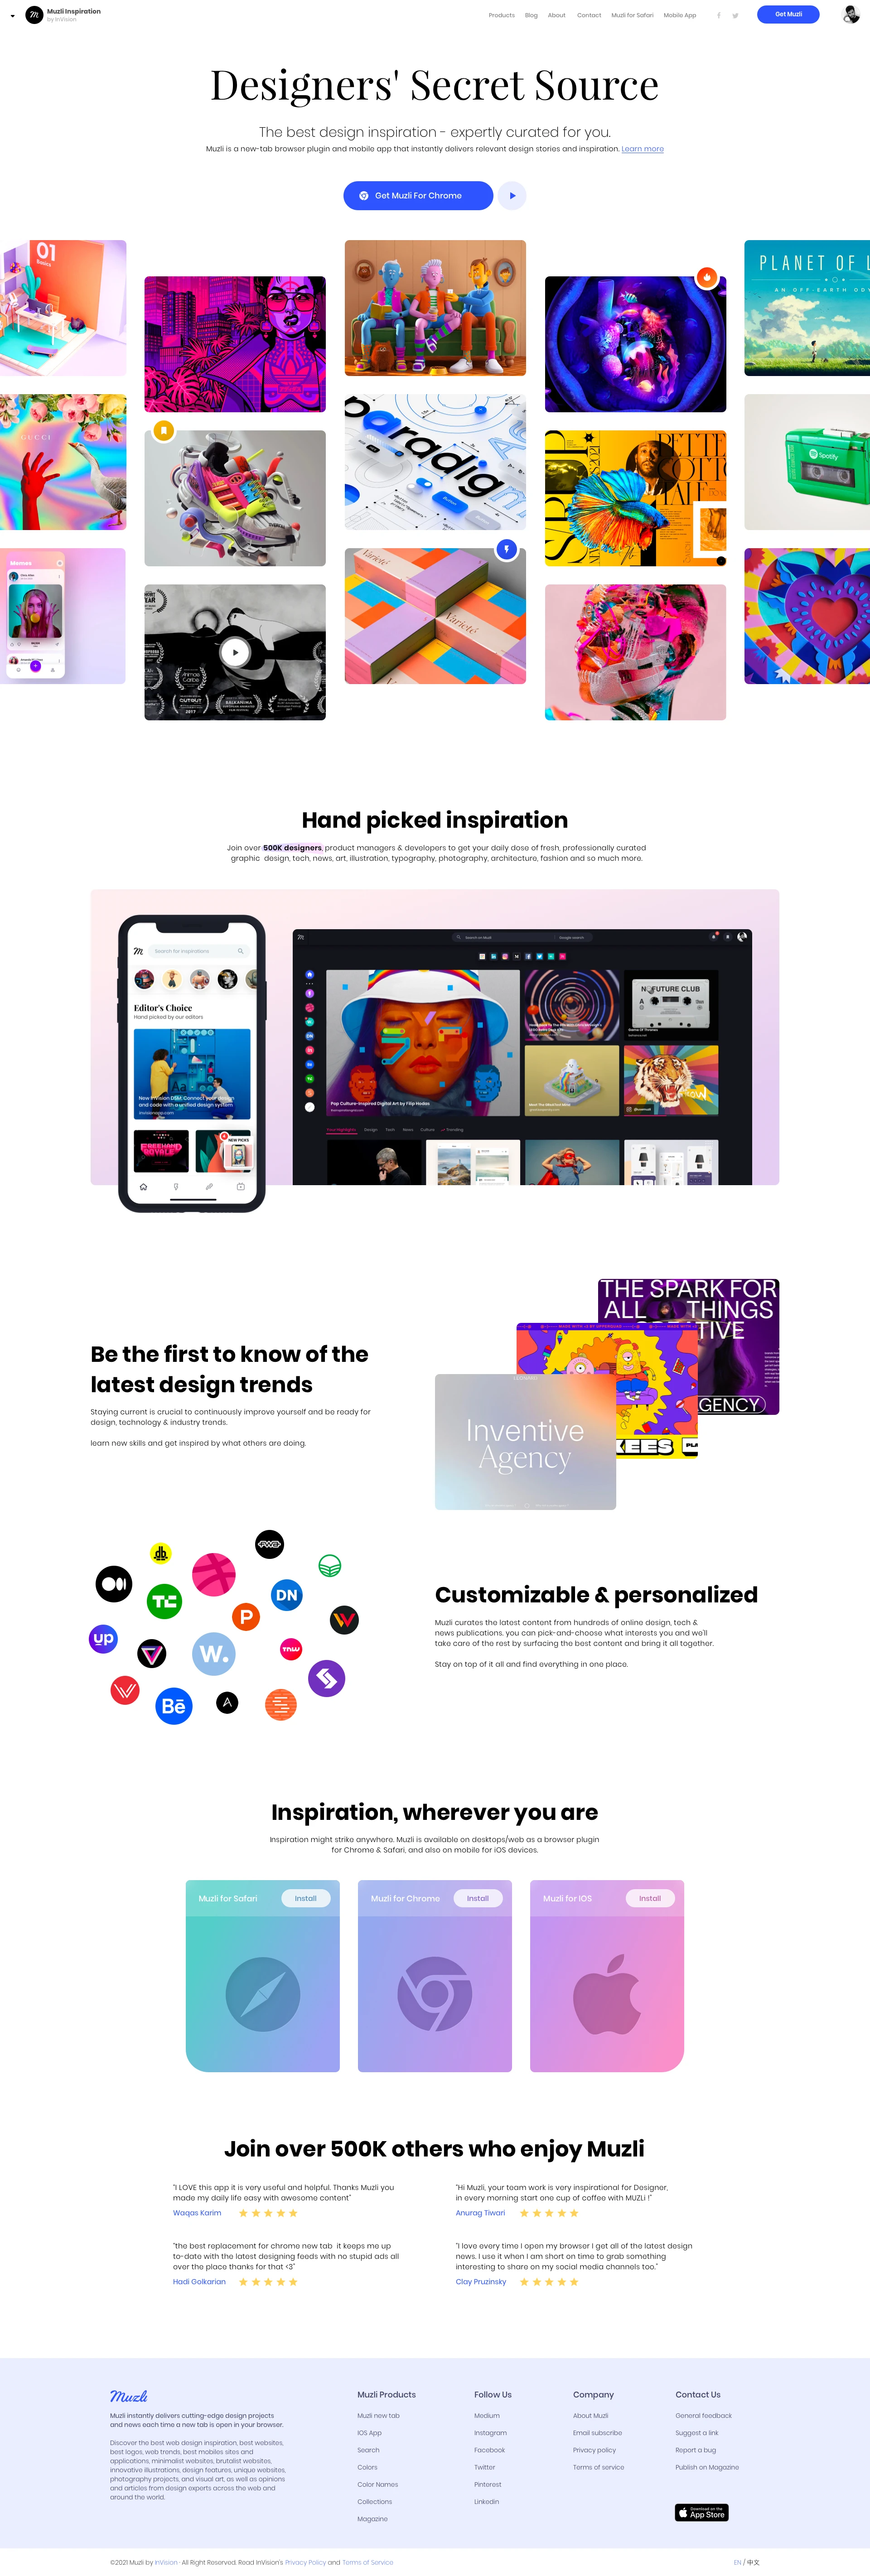 Muzli Design Inspiration Landing Page Example: Designers' Secret Source. The best design inspiration - expertly curated for you. Muzli is a new-tab browser plugin and mobile app that instantly delivers relevant design stories and inspiration.